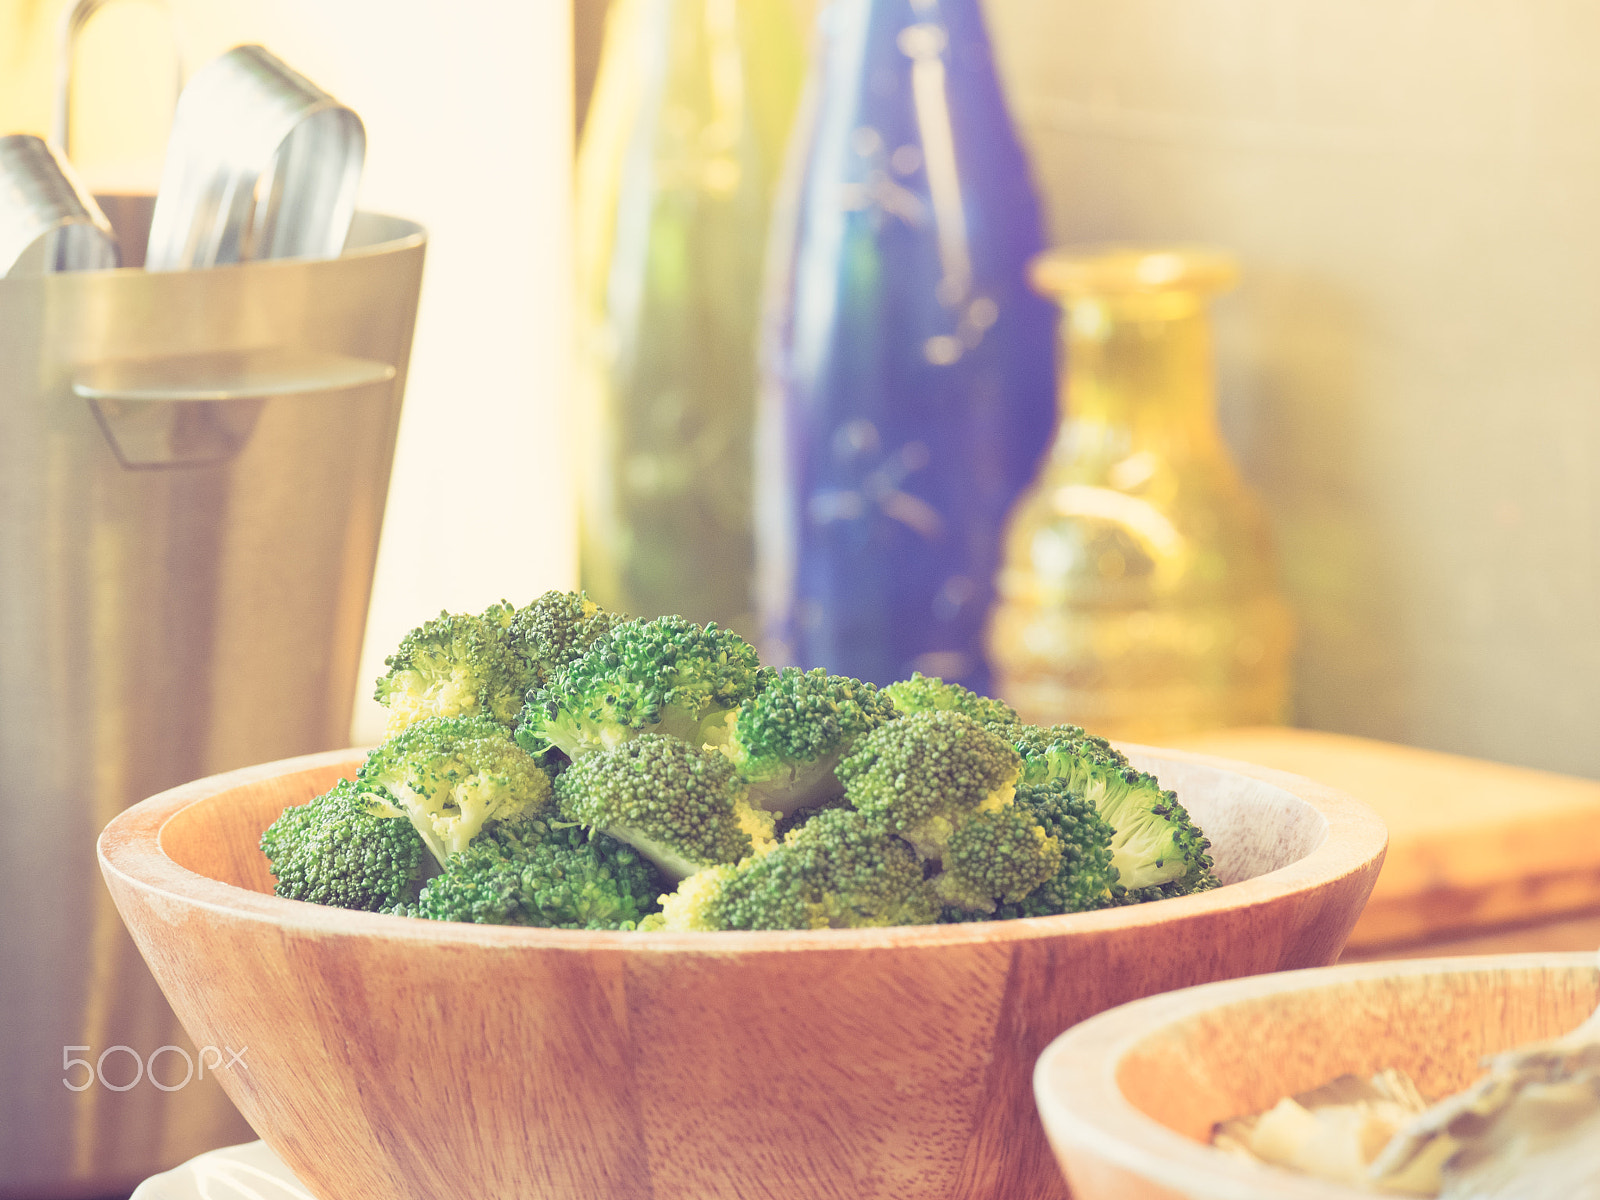 Olympus OM-D E-M1 sample photo. Fresh broccoli  in bowl on wooden table close up concept for hea photography